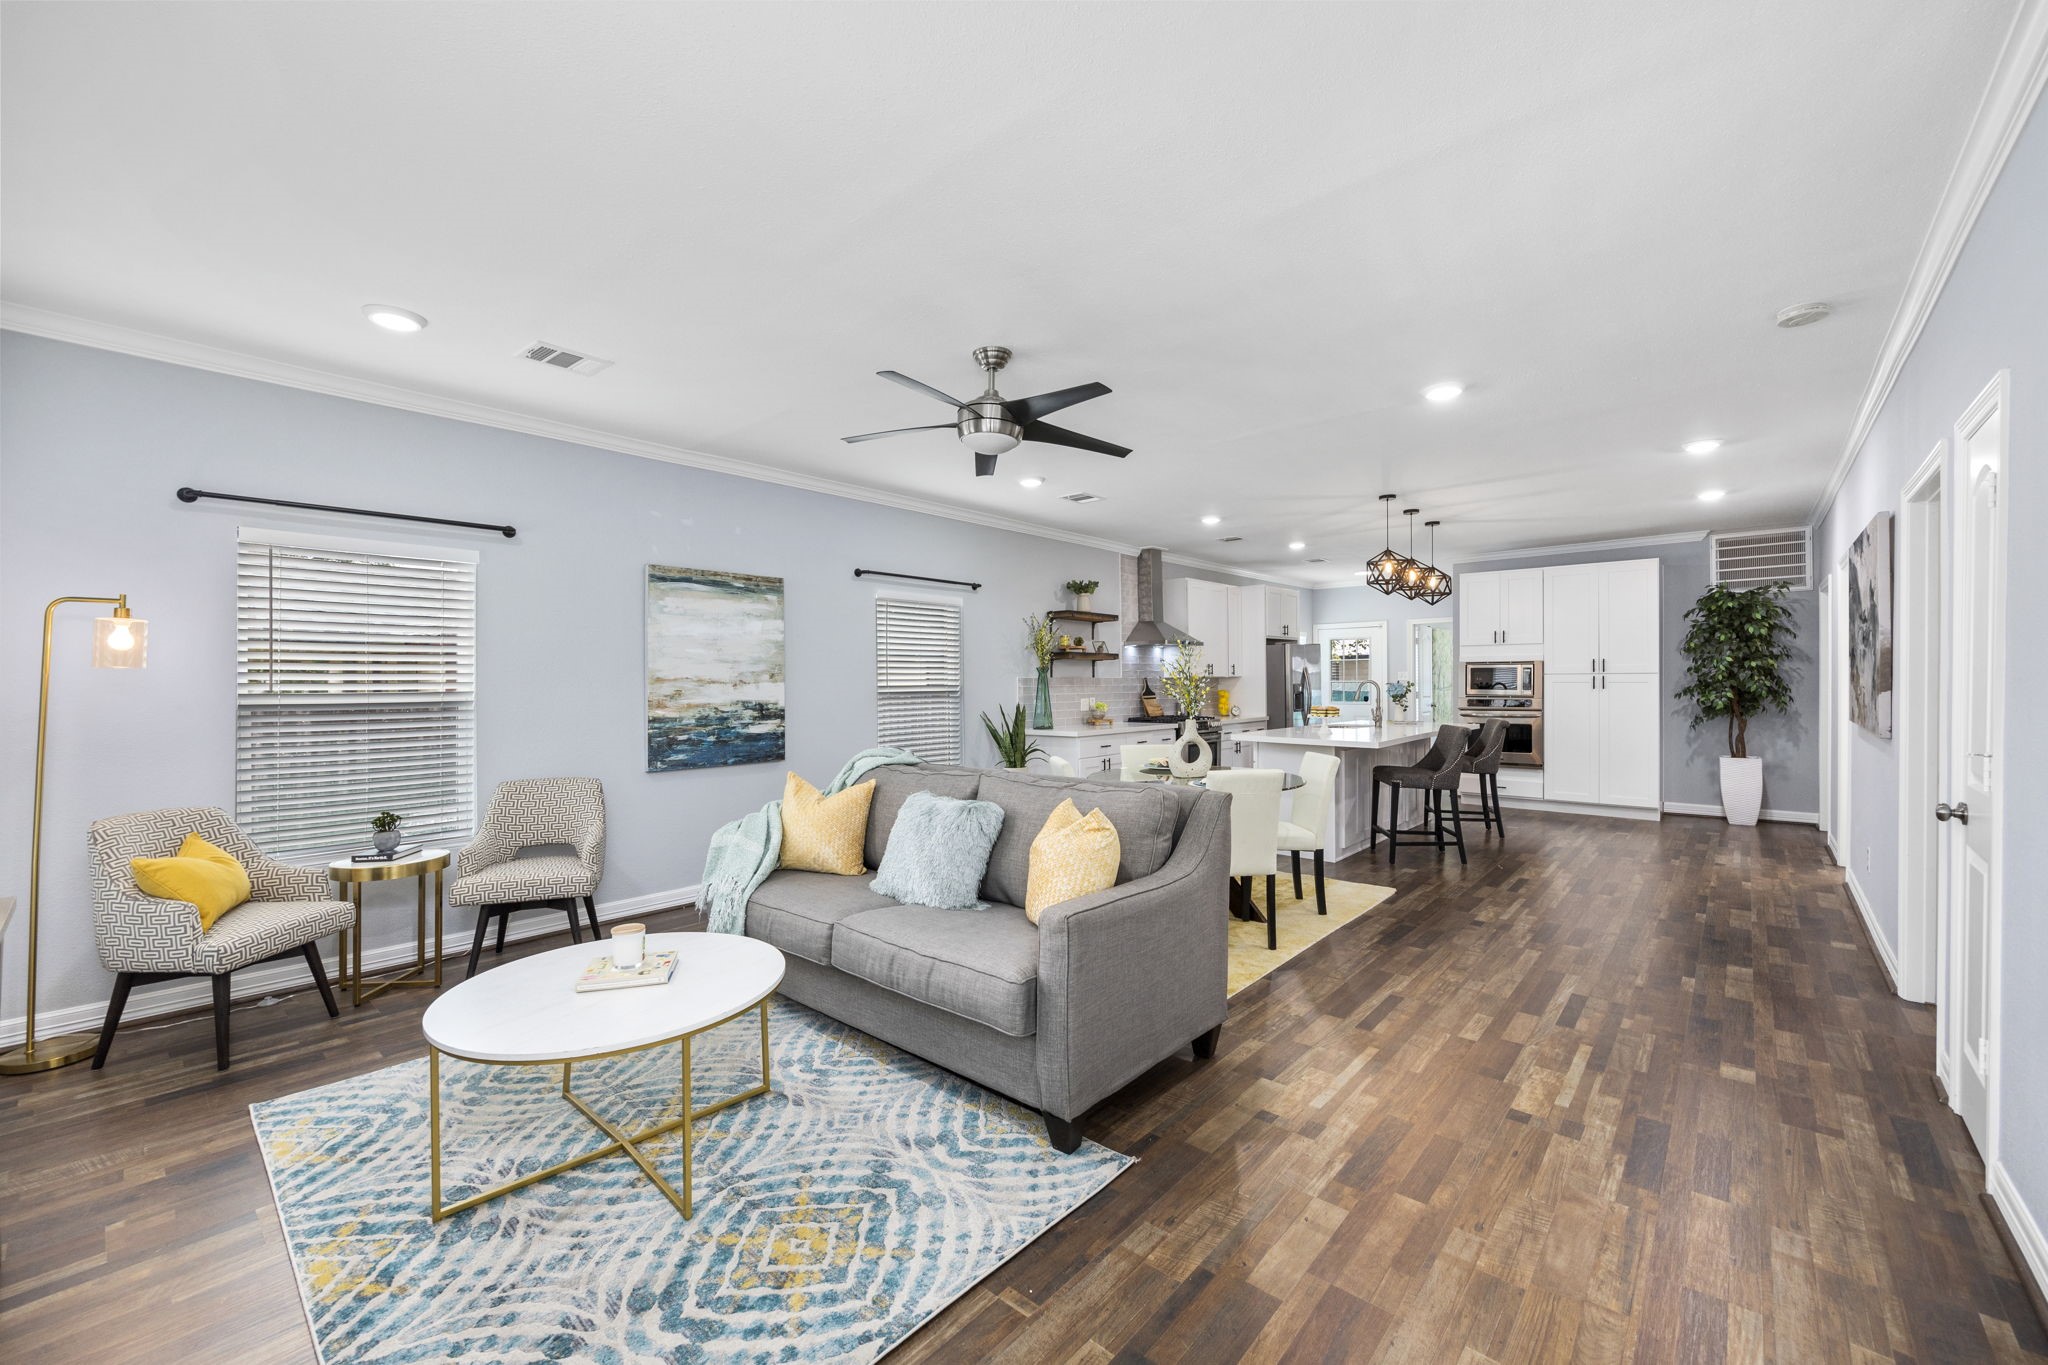 All of your main areas flow seamlessly together throughout this light and bright floor plan